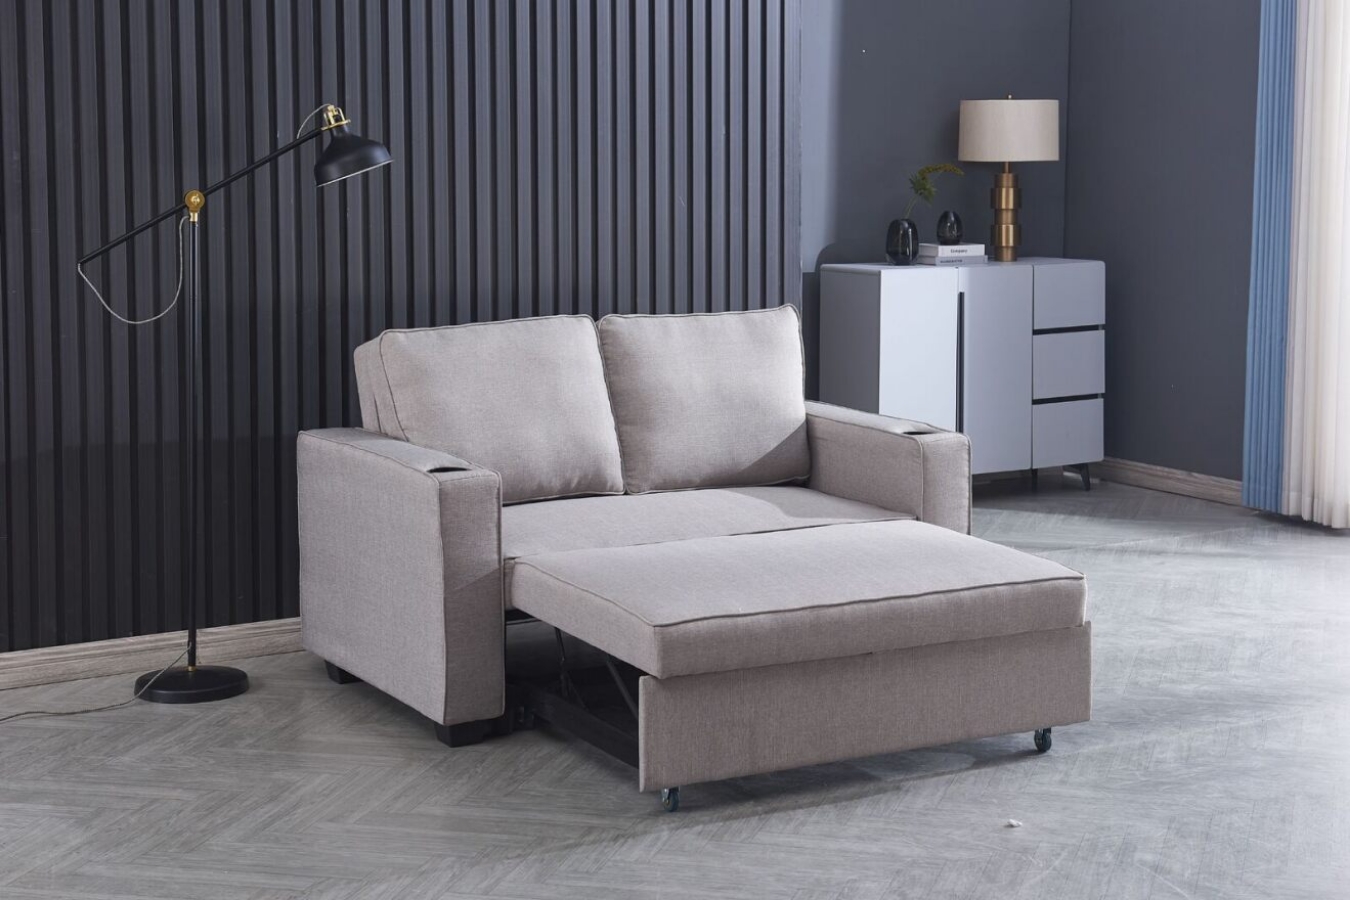 Upgrade your home with the elegant and comfortable Miles 2 Seater Sofa.